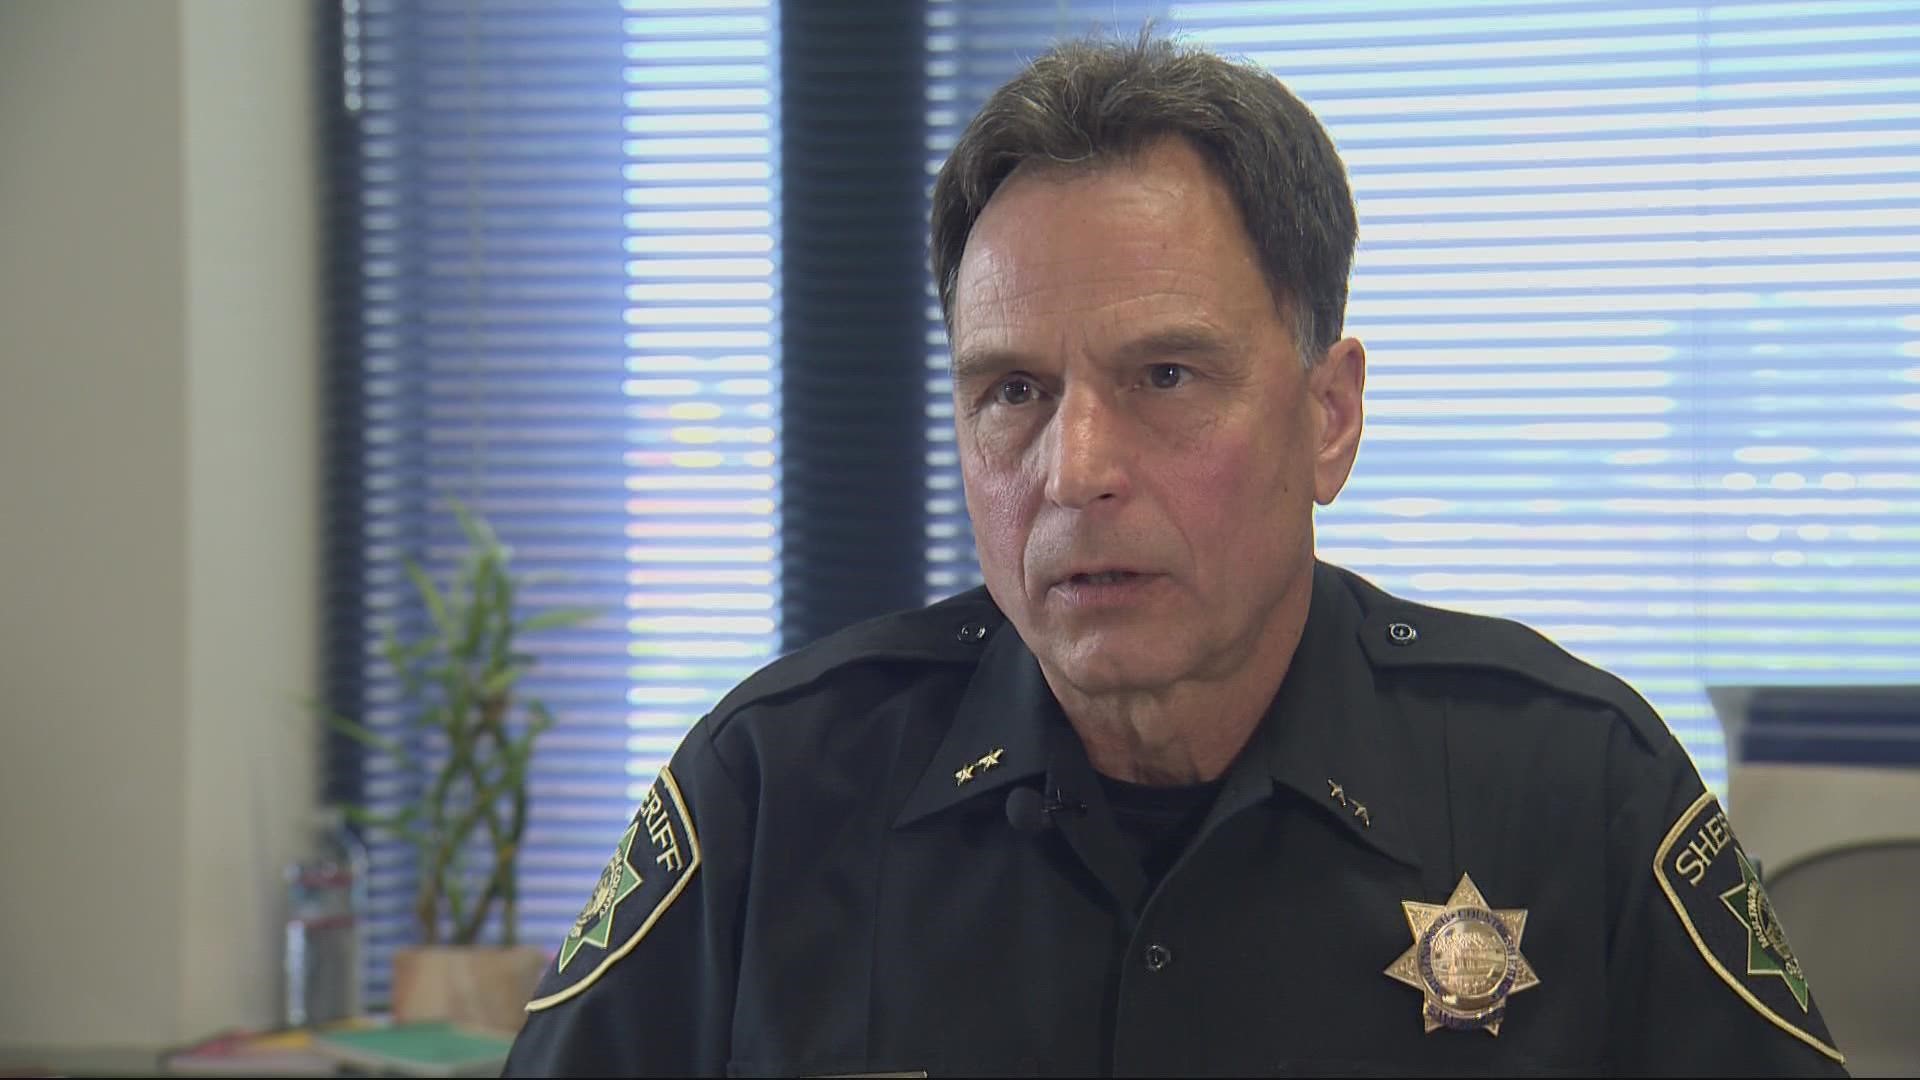 Sheriff Mike Reese addressed the amount of violent crime in the county on Friday.